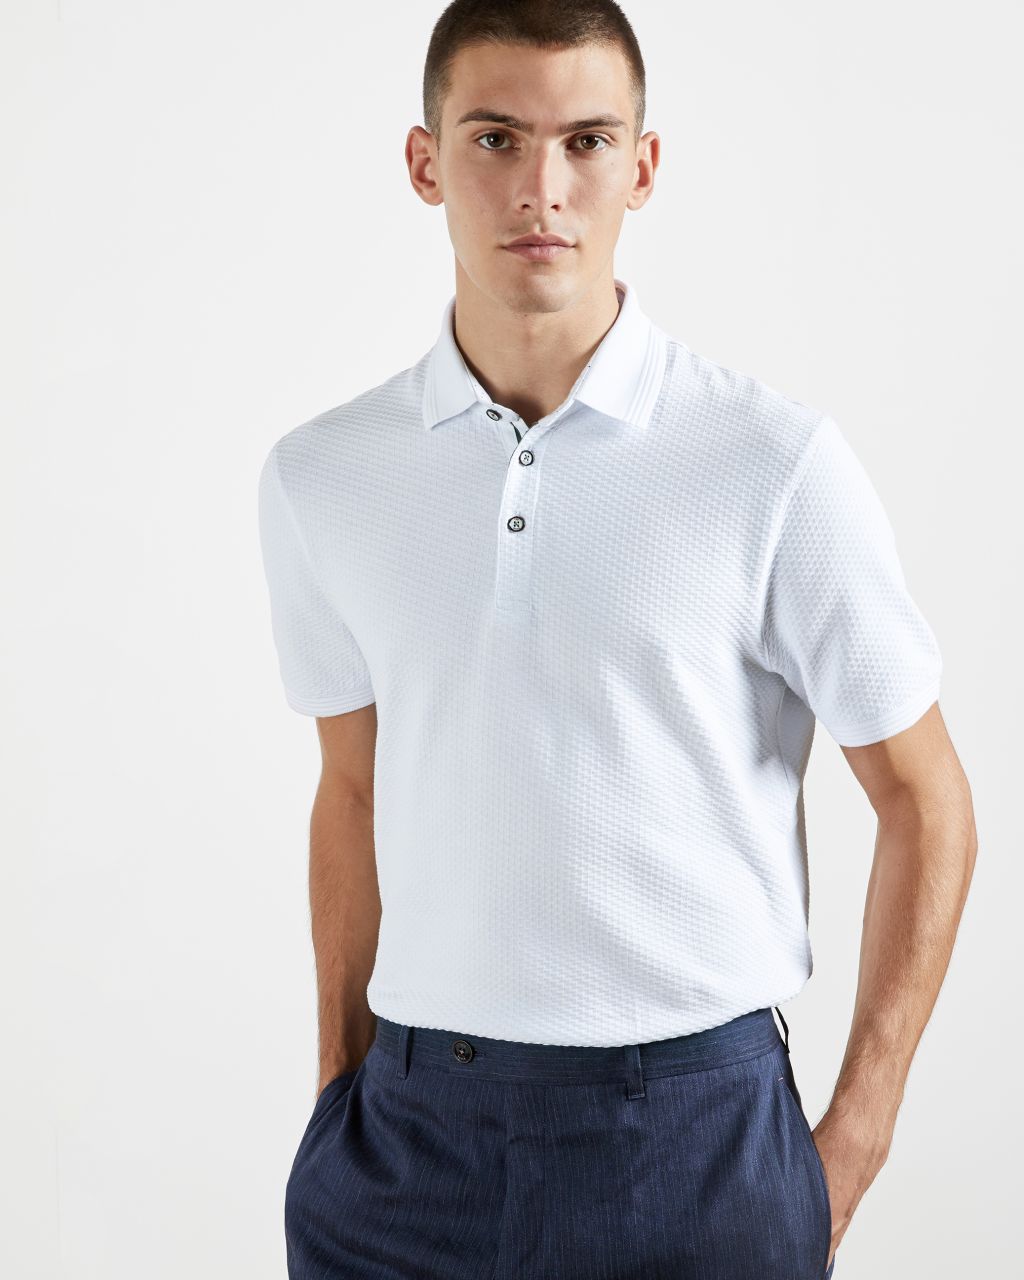 Ted Baker Men's Textured Cotton Polo in White, Infuse